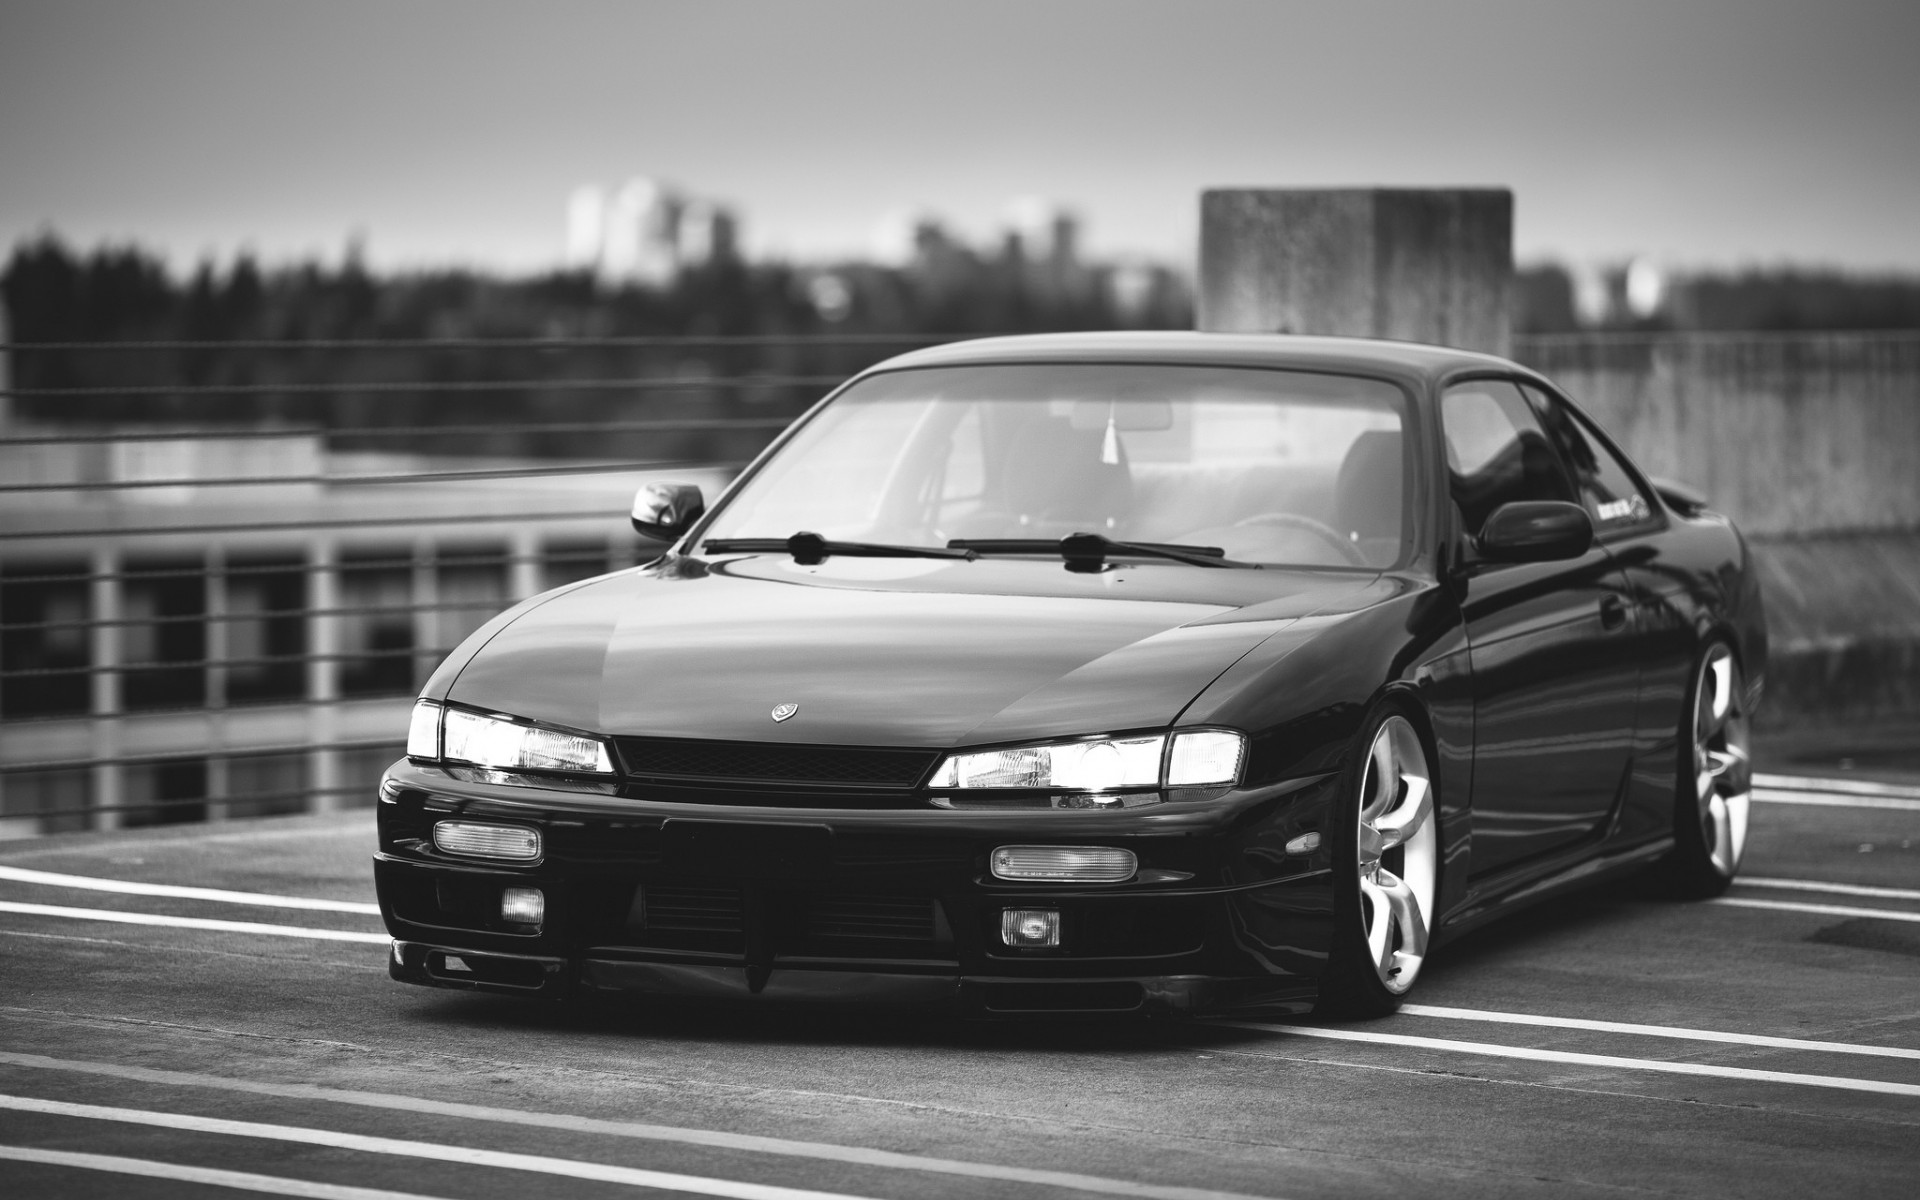 Nissan Silvia S14 Pictures Photos Wallpaper